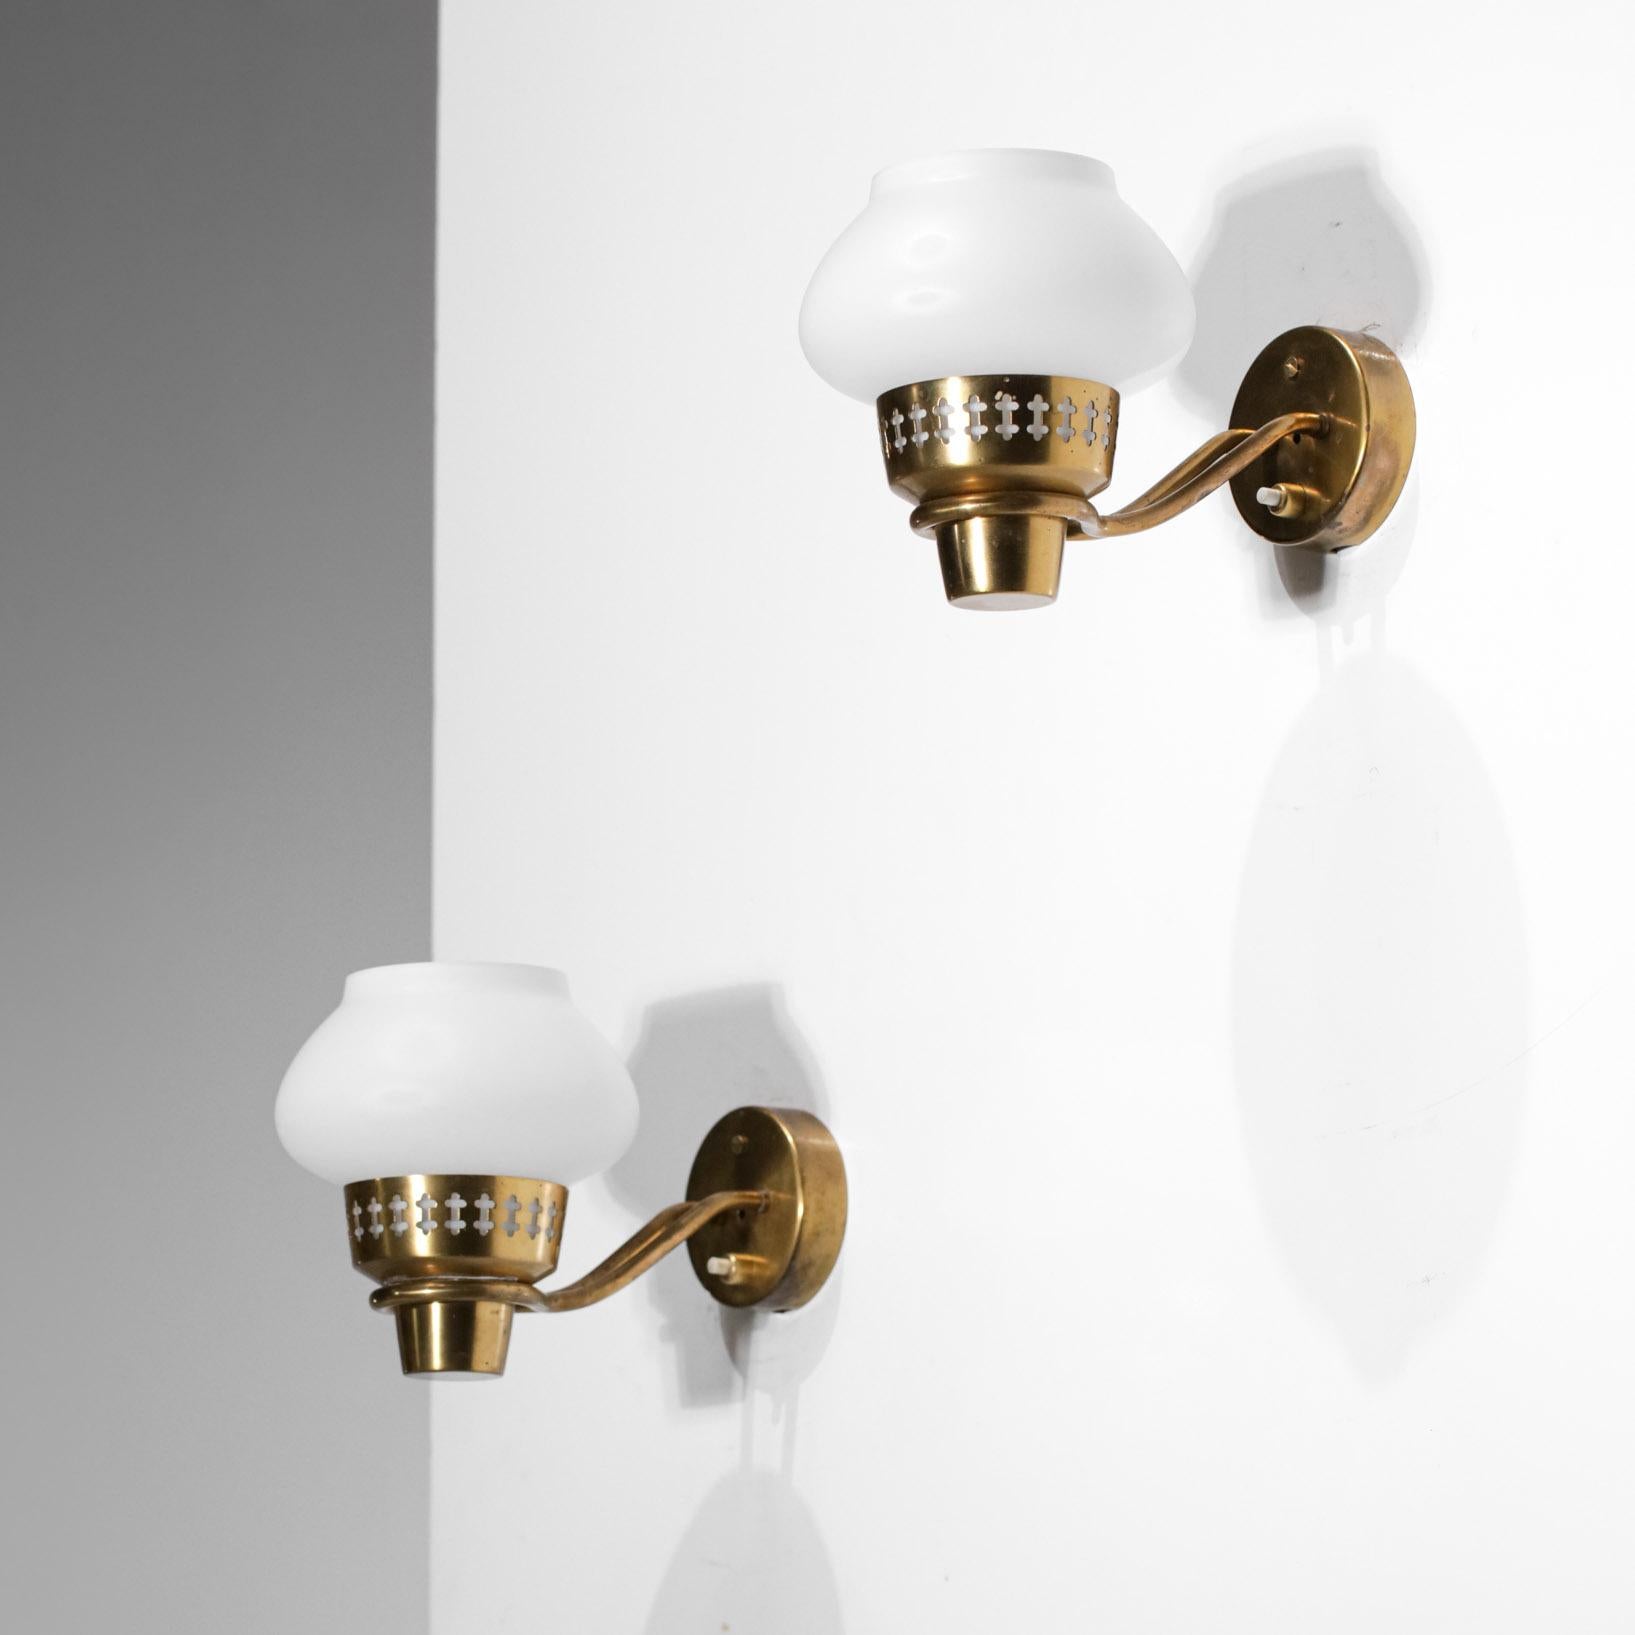 Pair of Scandinavian wall sconces by Swedish designer Hans Bergström. Rare model designed in the 60s. Structure of the sconces in solid brass, diffuser in opaque white opaline, nice model of delicate and decorative sconces. Very nice vintage